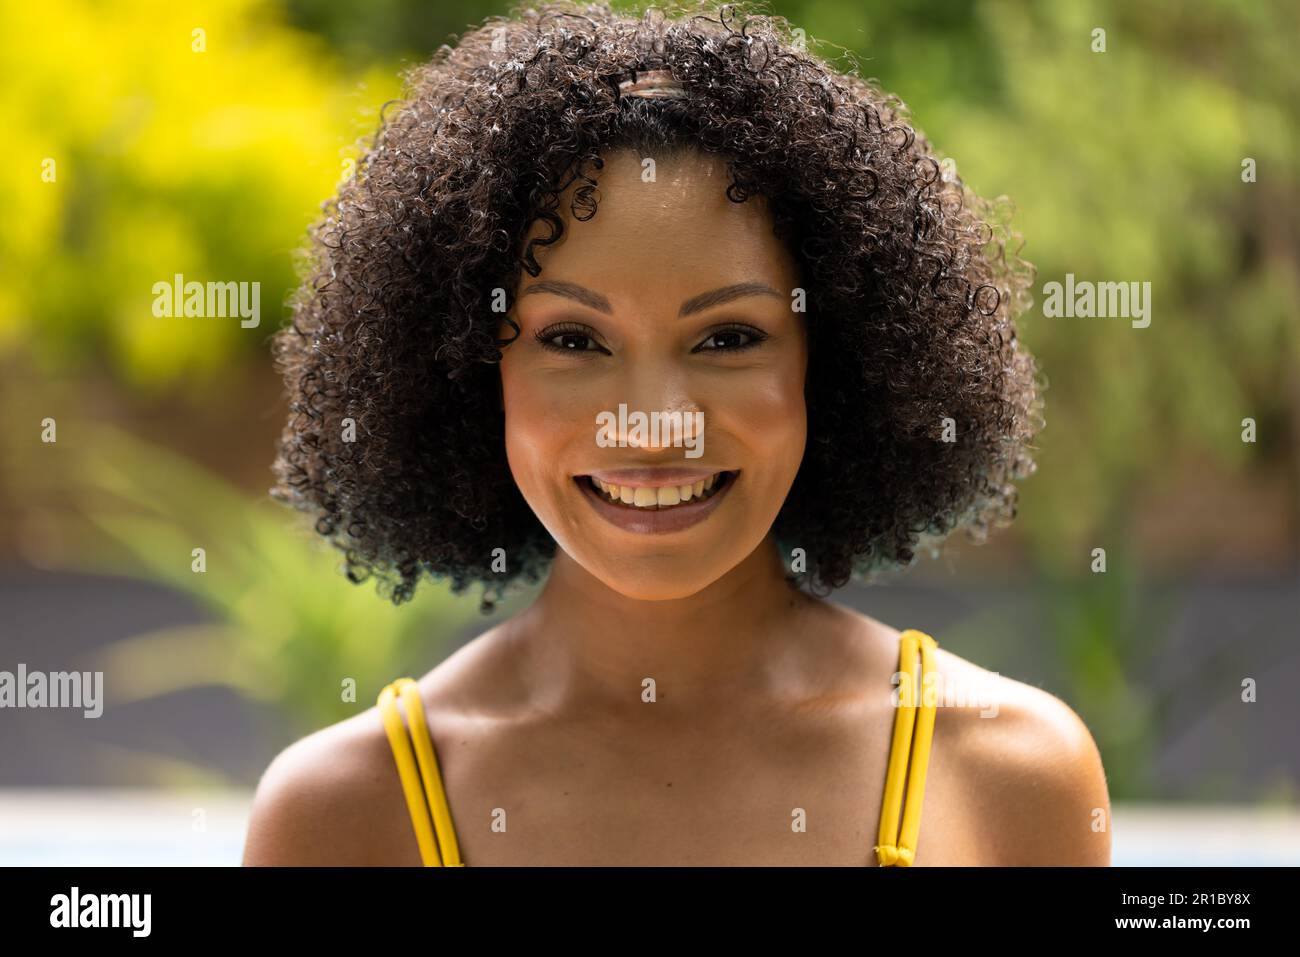 Portrait of smiling african american woman in swimsuit standing by pool in garden Stock Photo